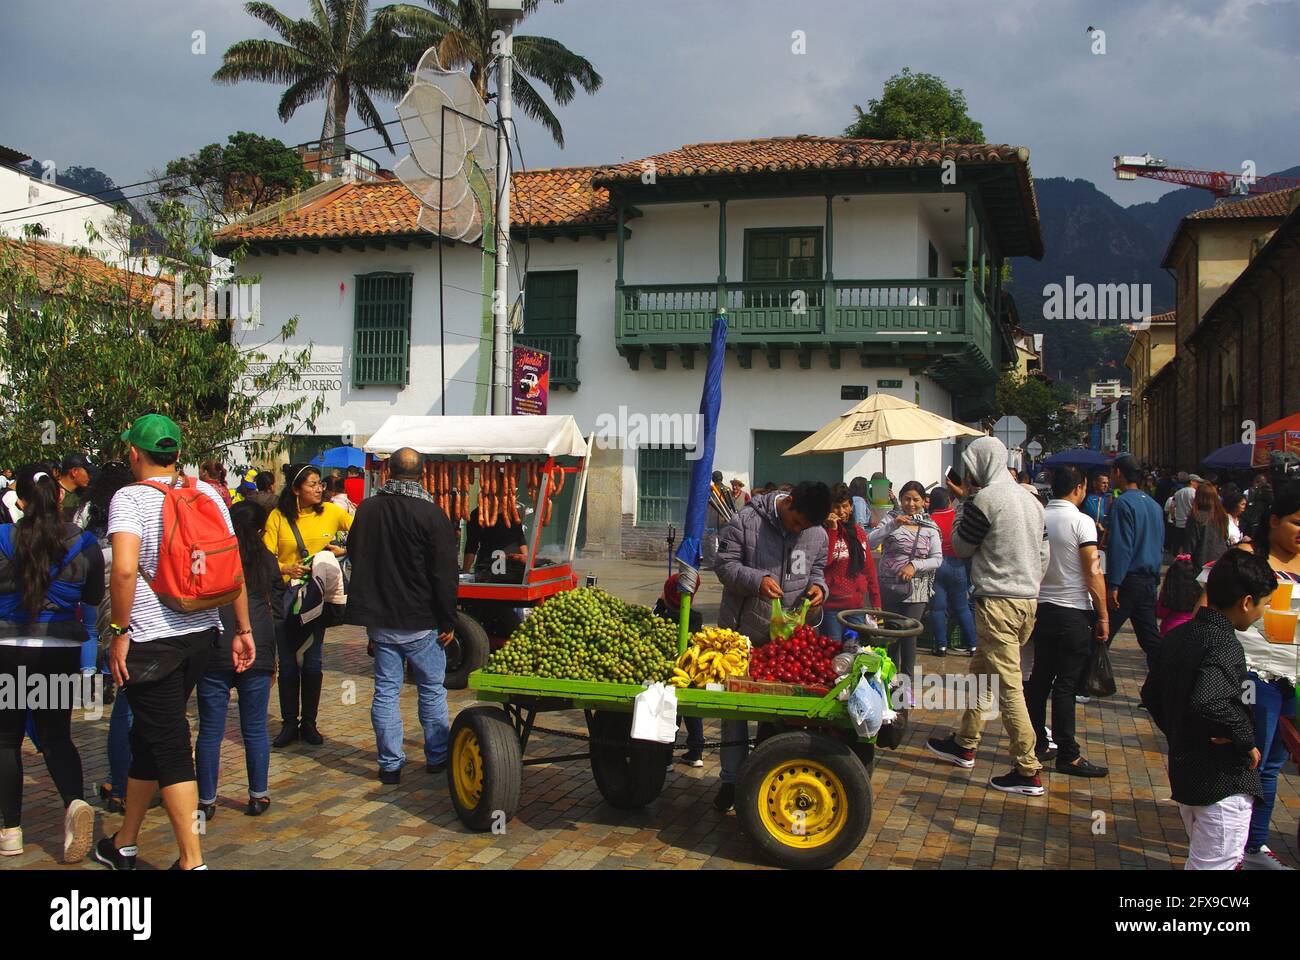 Bust square with Monserrate Hill in background, Bogotá, Colombia, South America Stock Photo